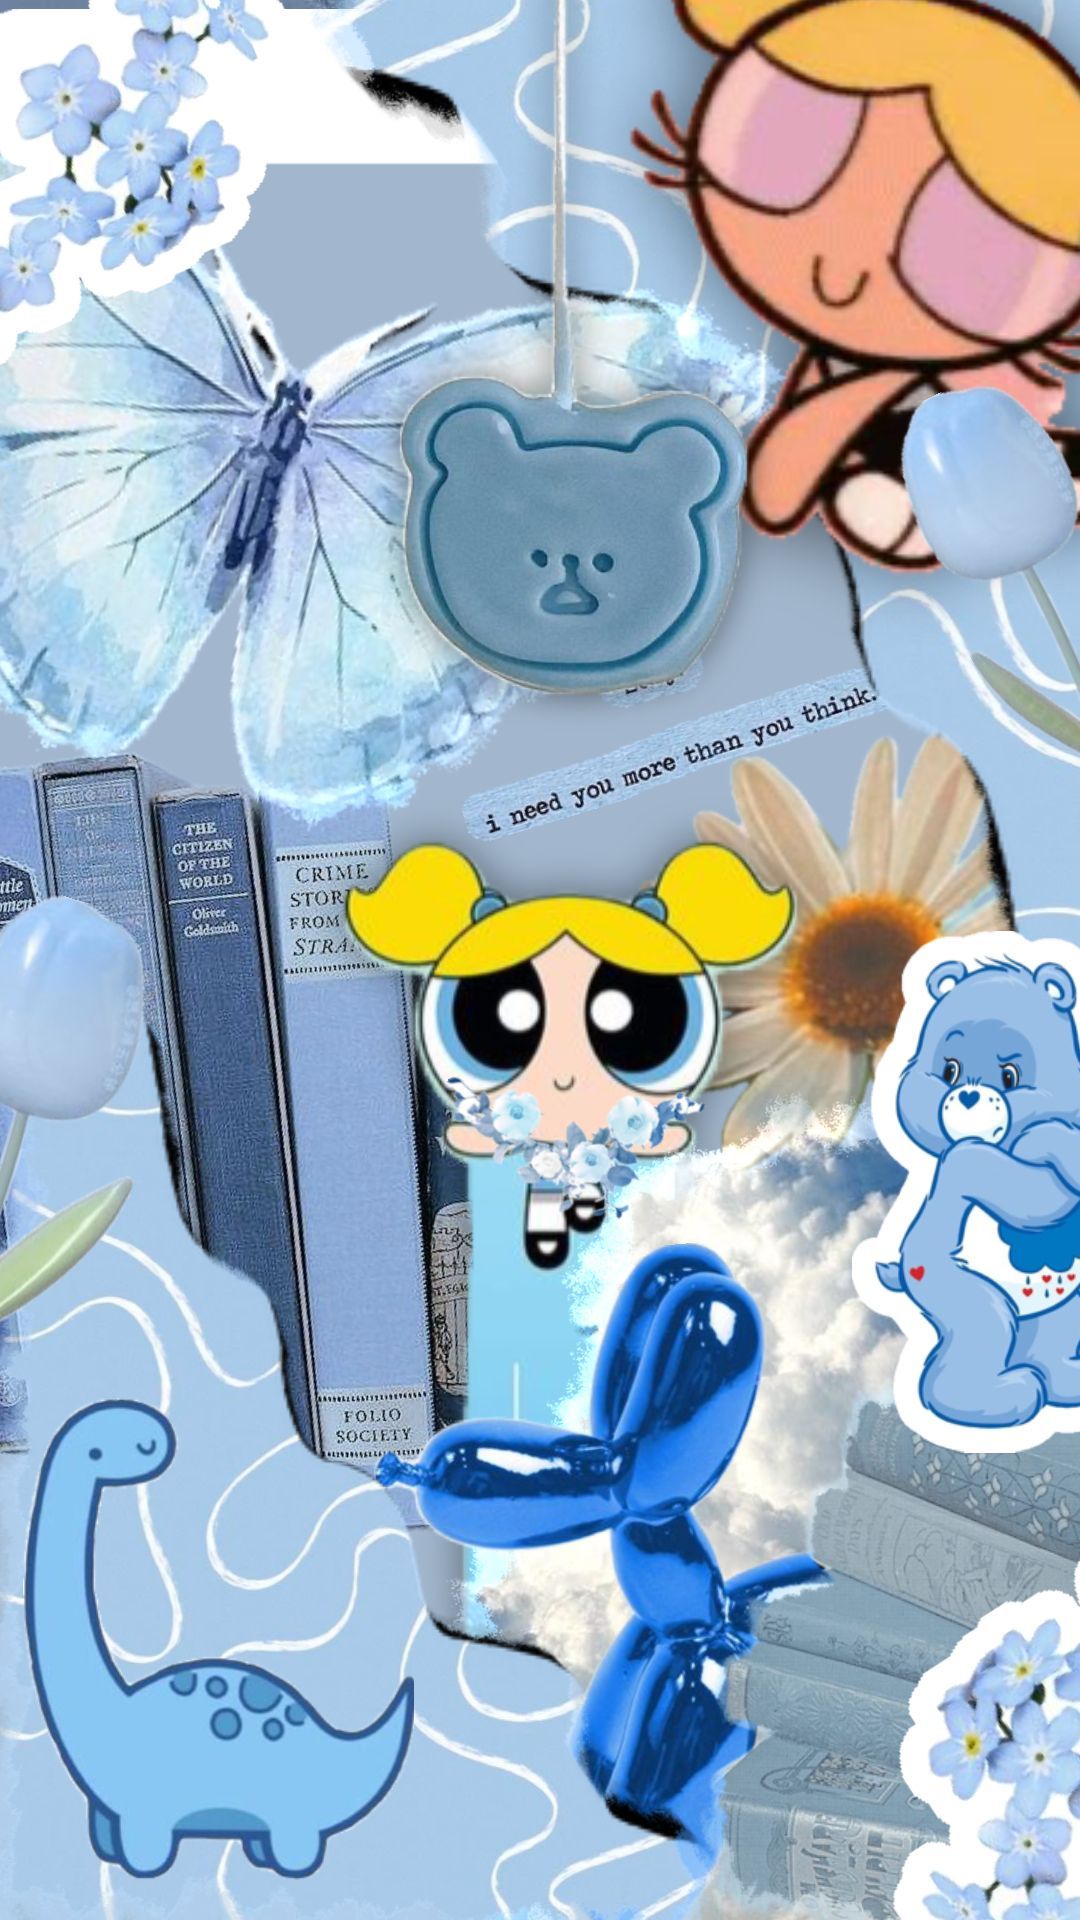 Blue aesthetic wallpaper for phone and desktop with Powerpuff Girls, Care Bears, and other characters - Bubbles